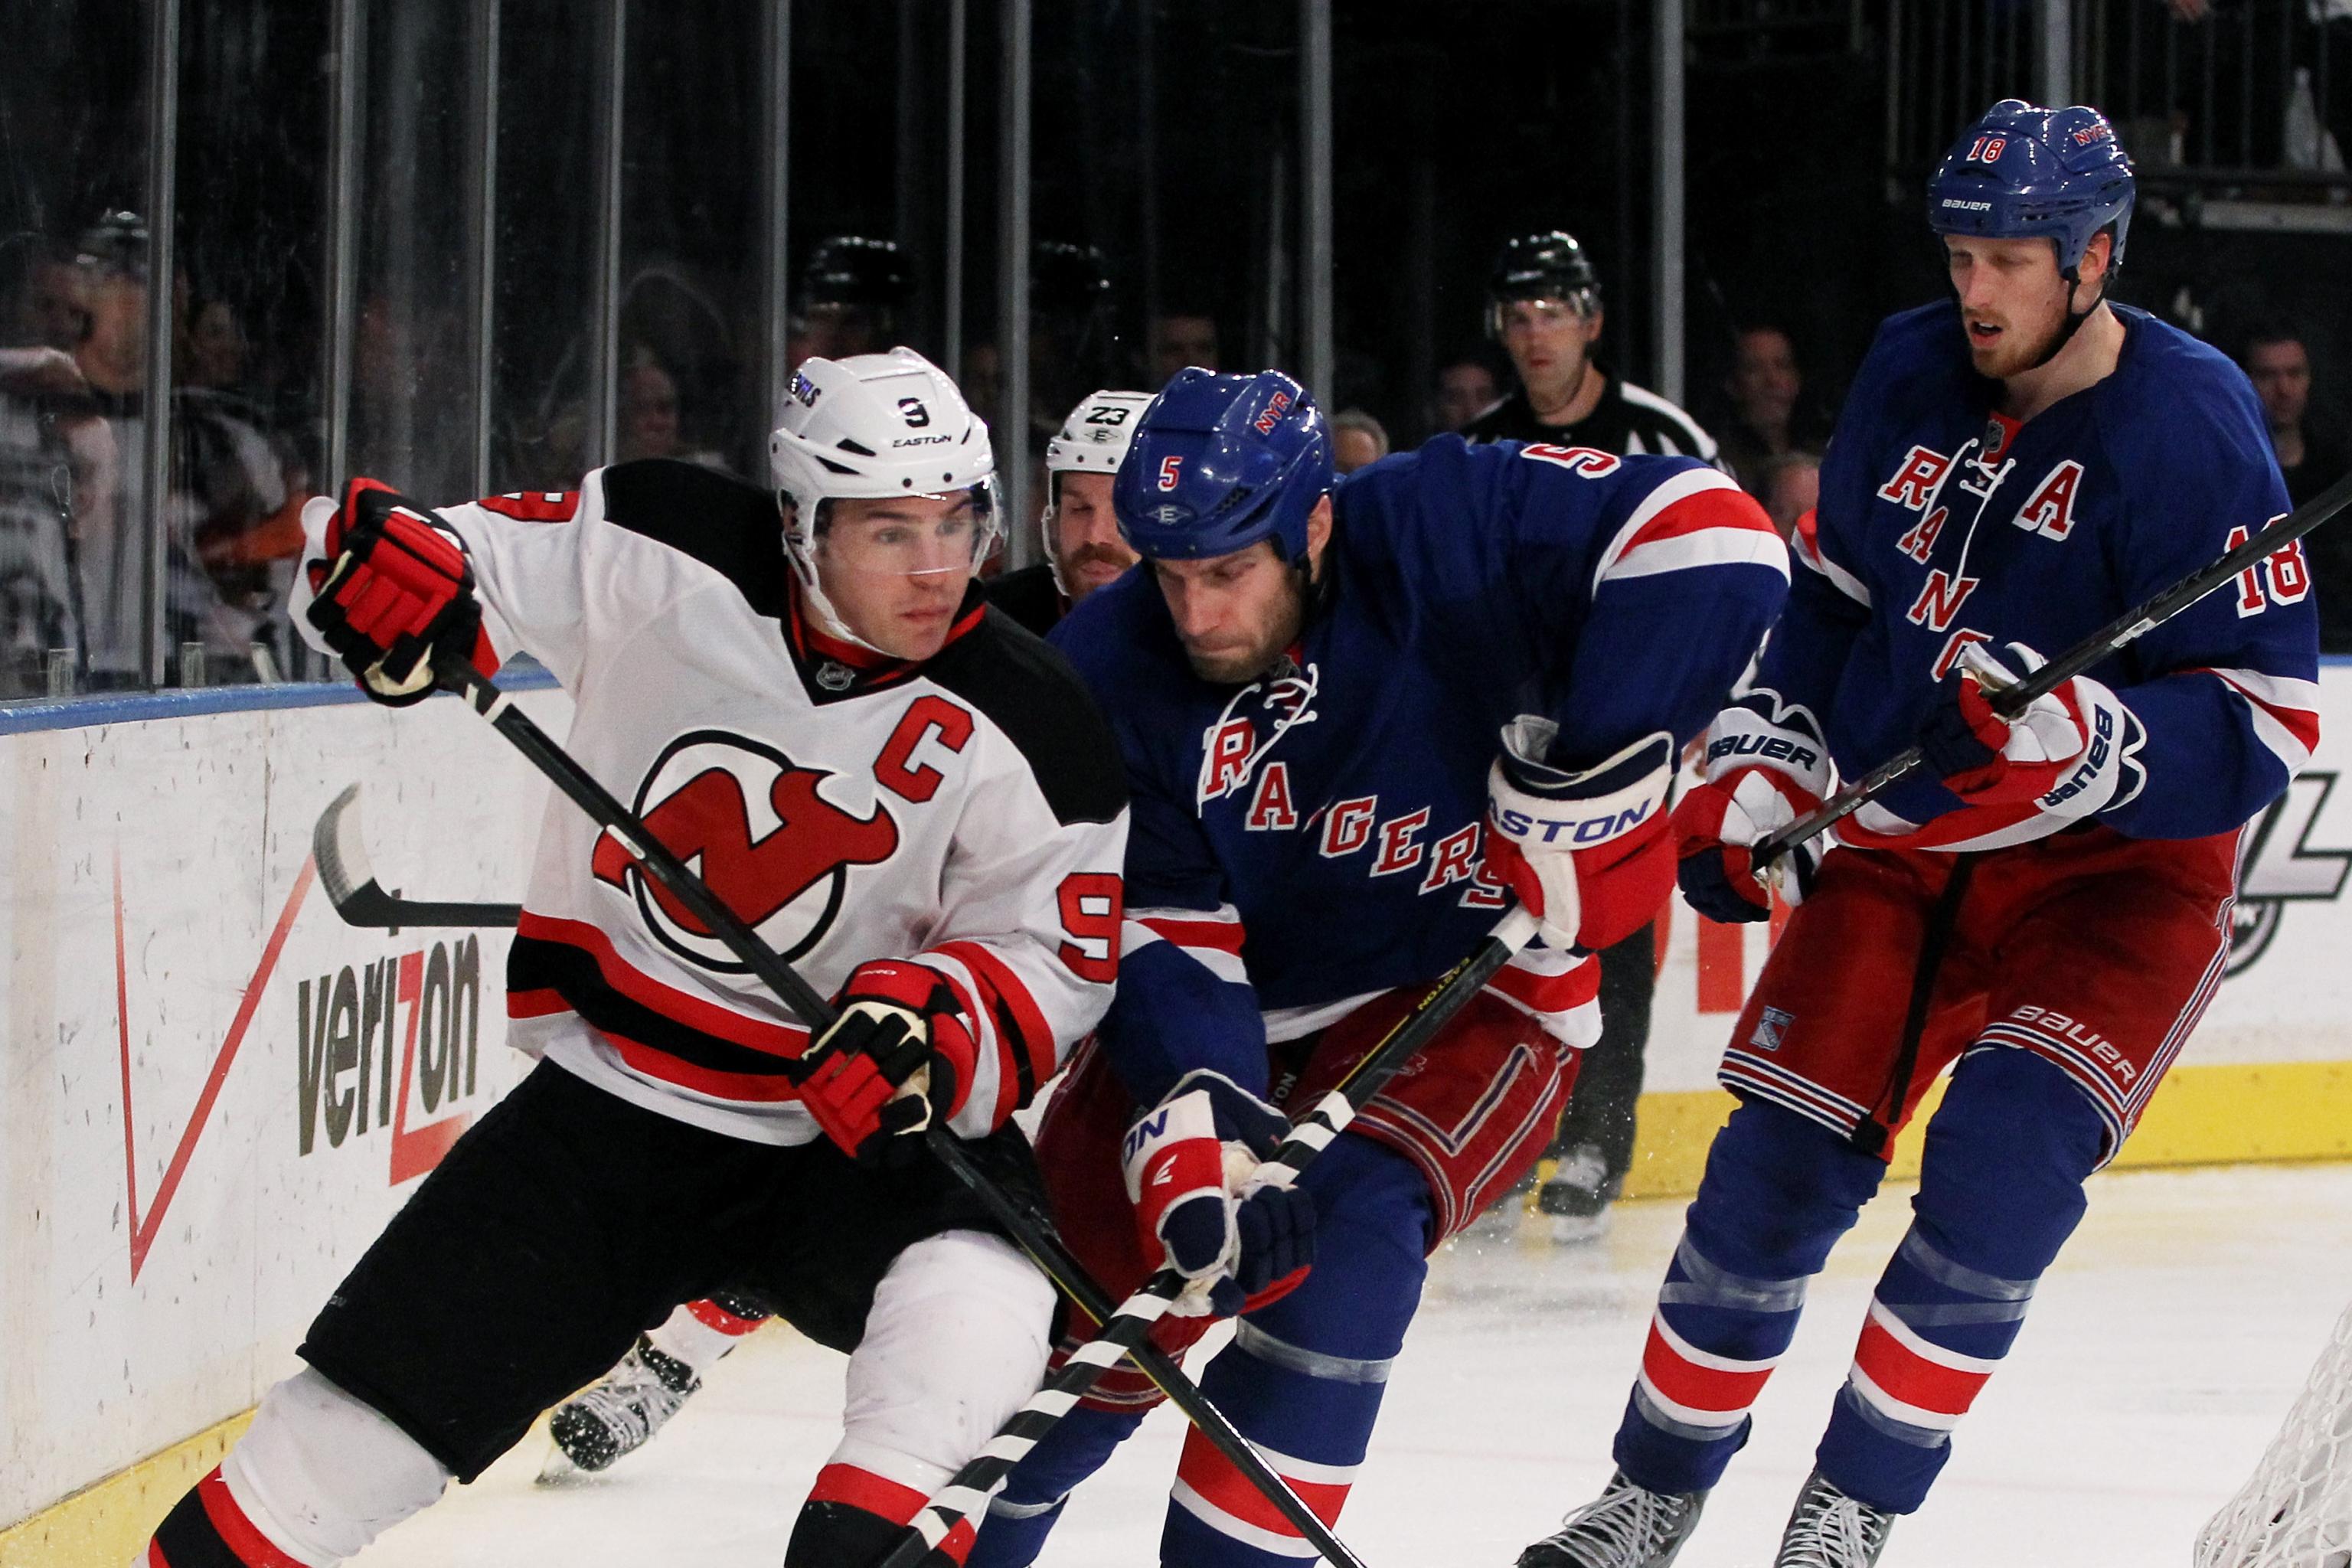 Devils vs. Rangers Playoffs Game 2 TV Schedule, Live Stream, Odds and